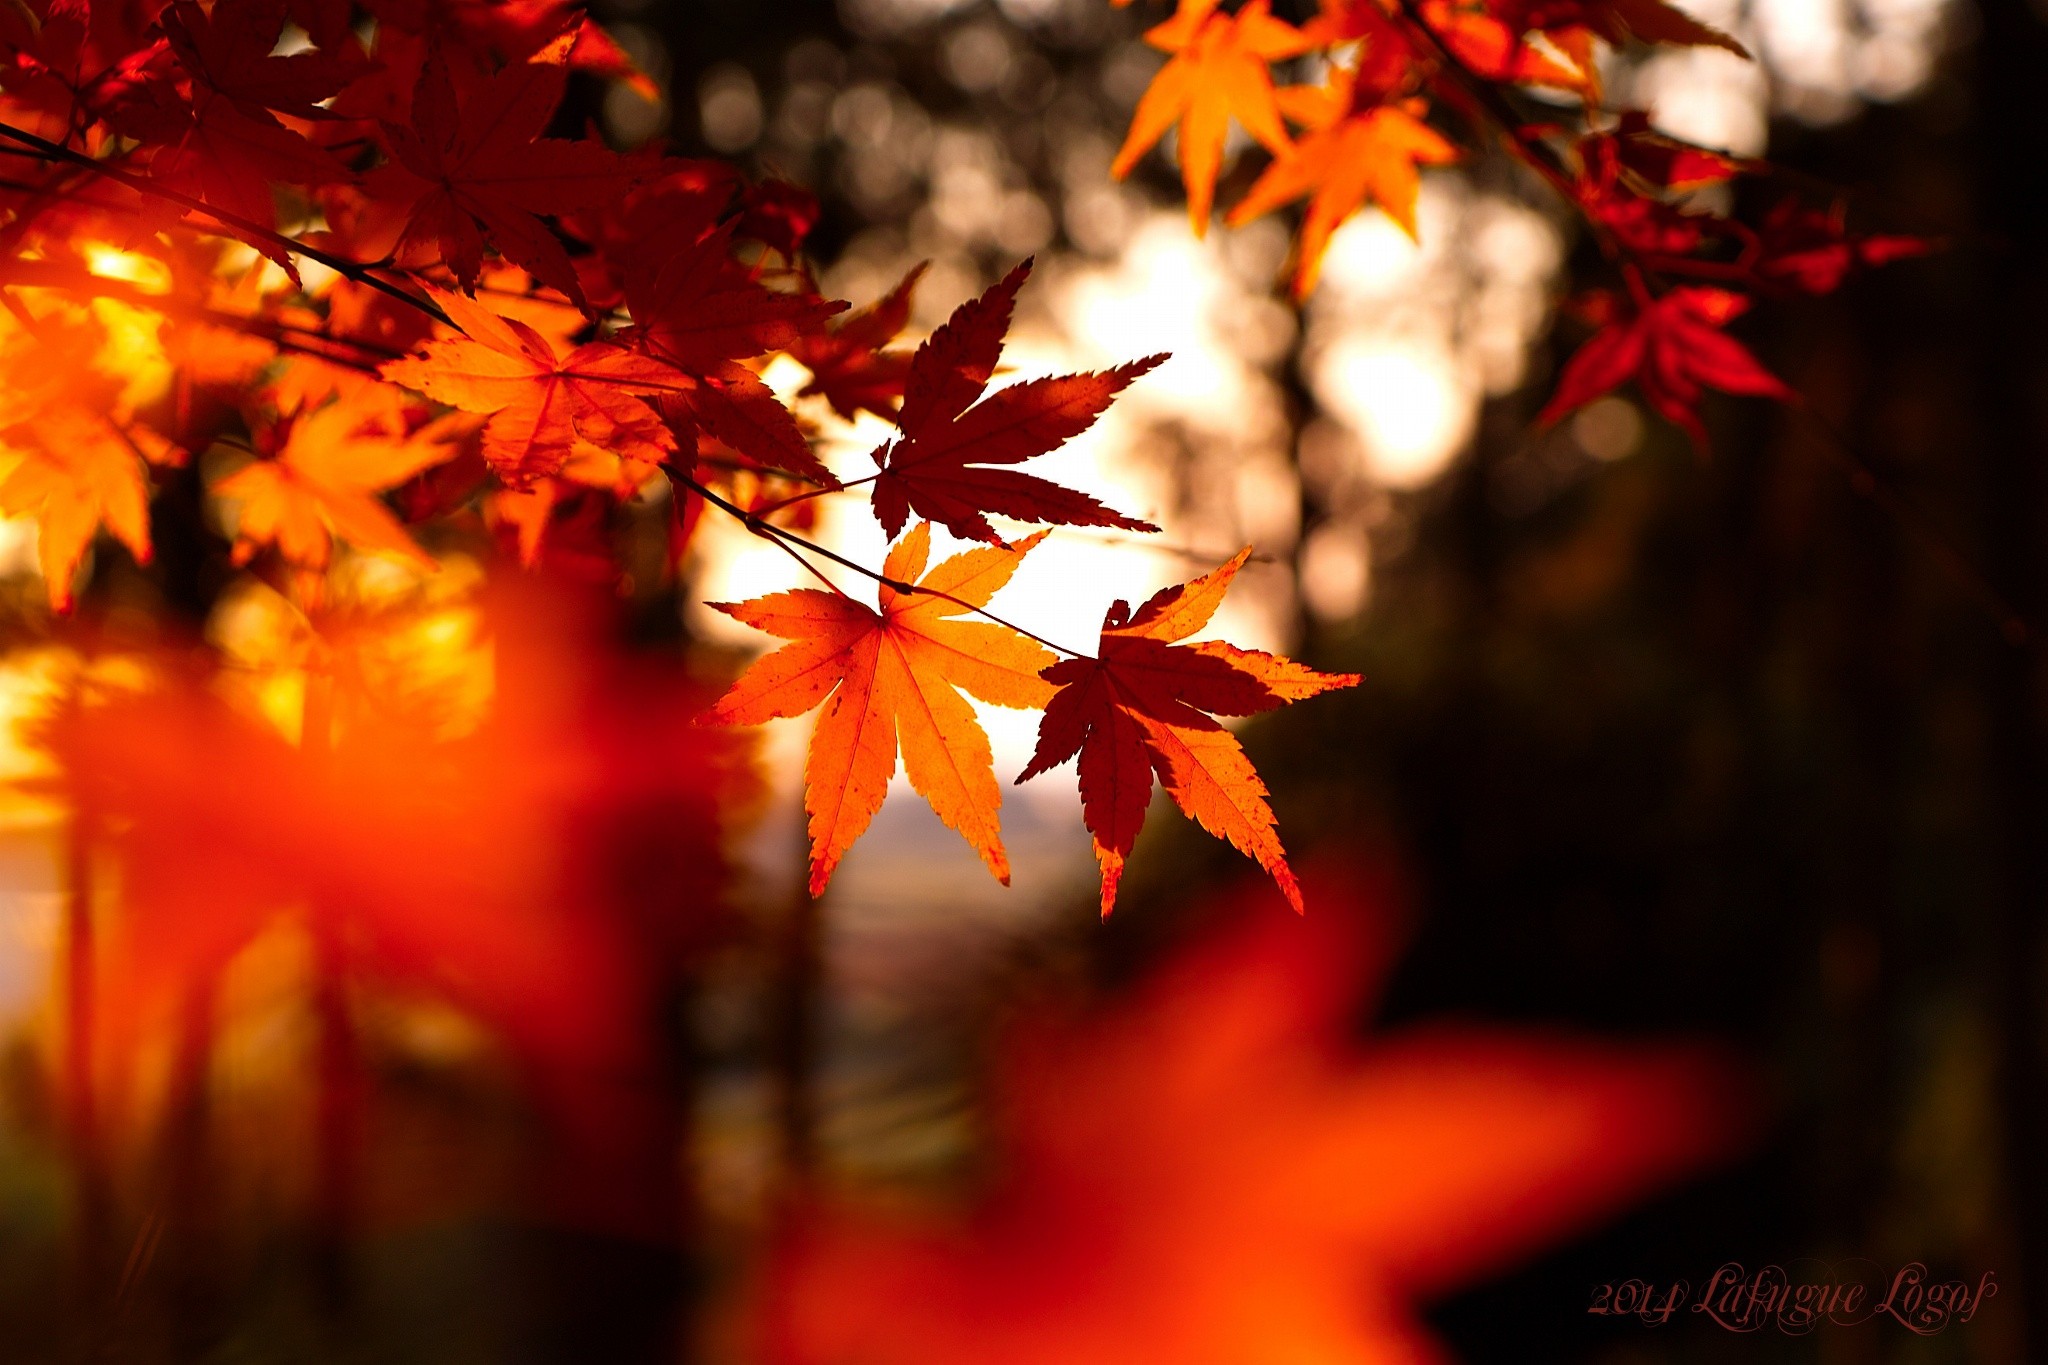 General 2048x1365 leaves fall depth of field plants outdoors 2014 (Year) maple leaves